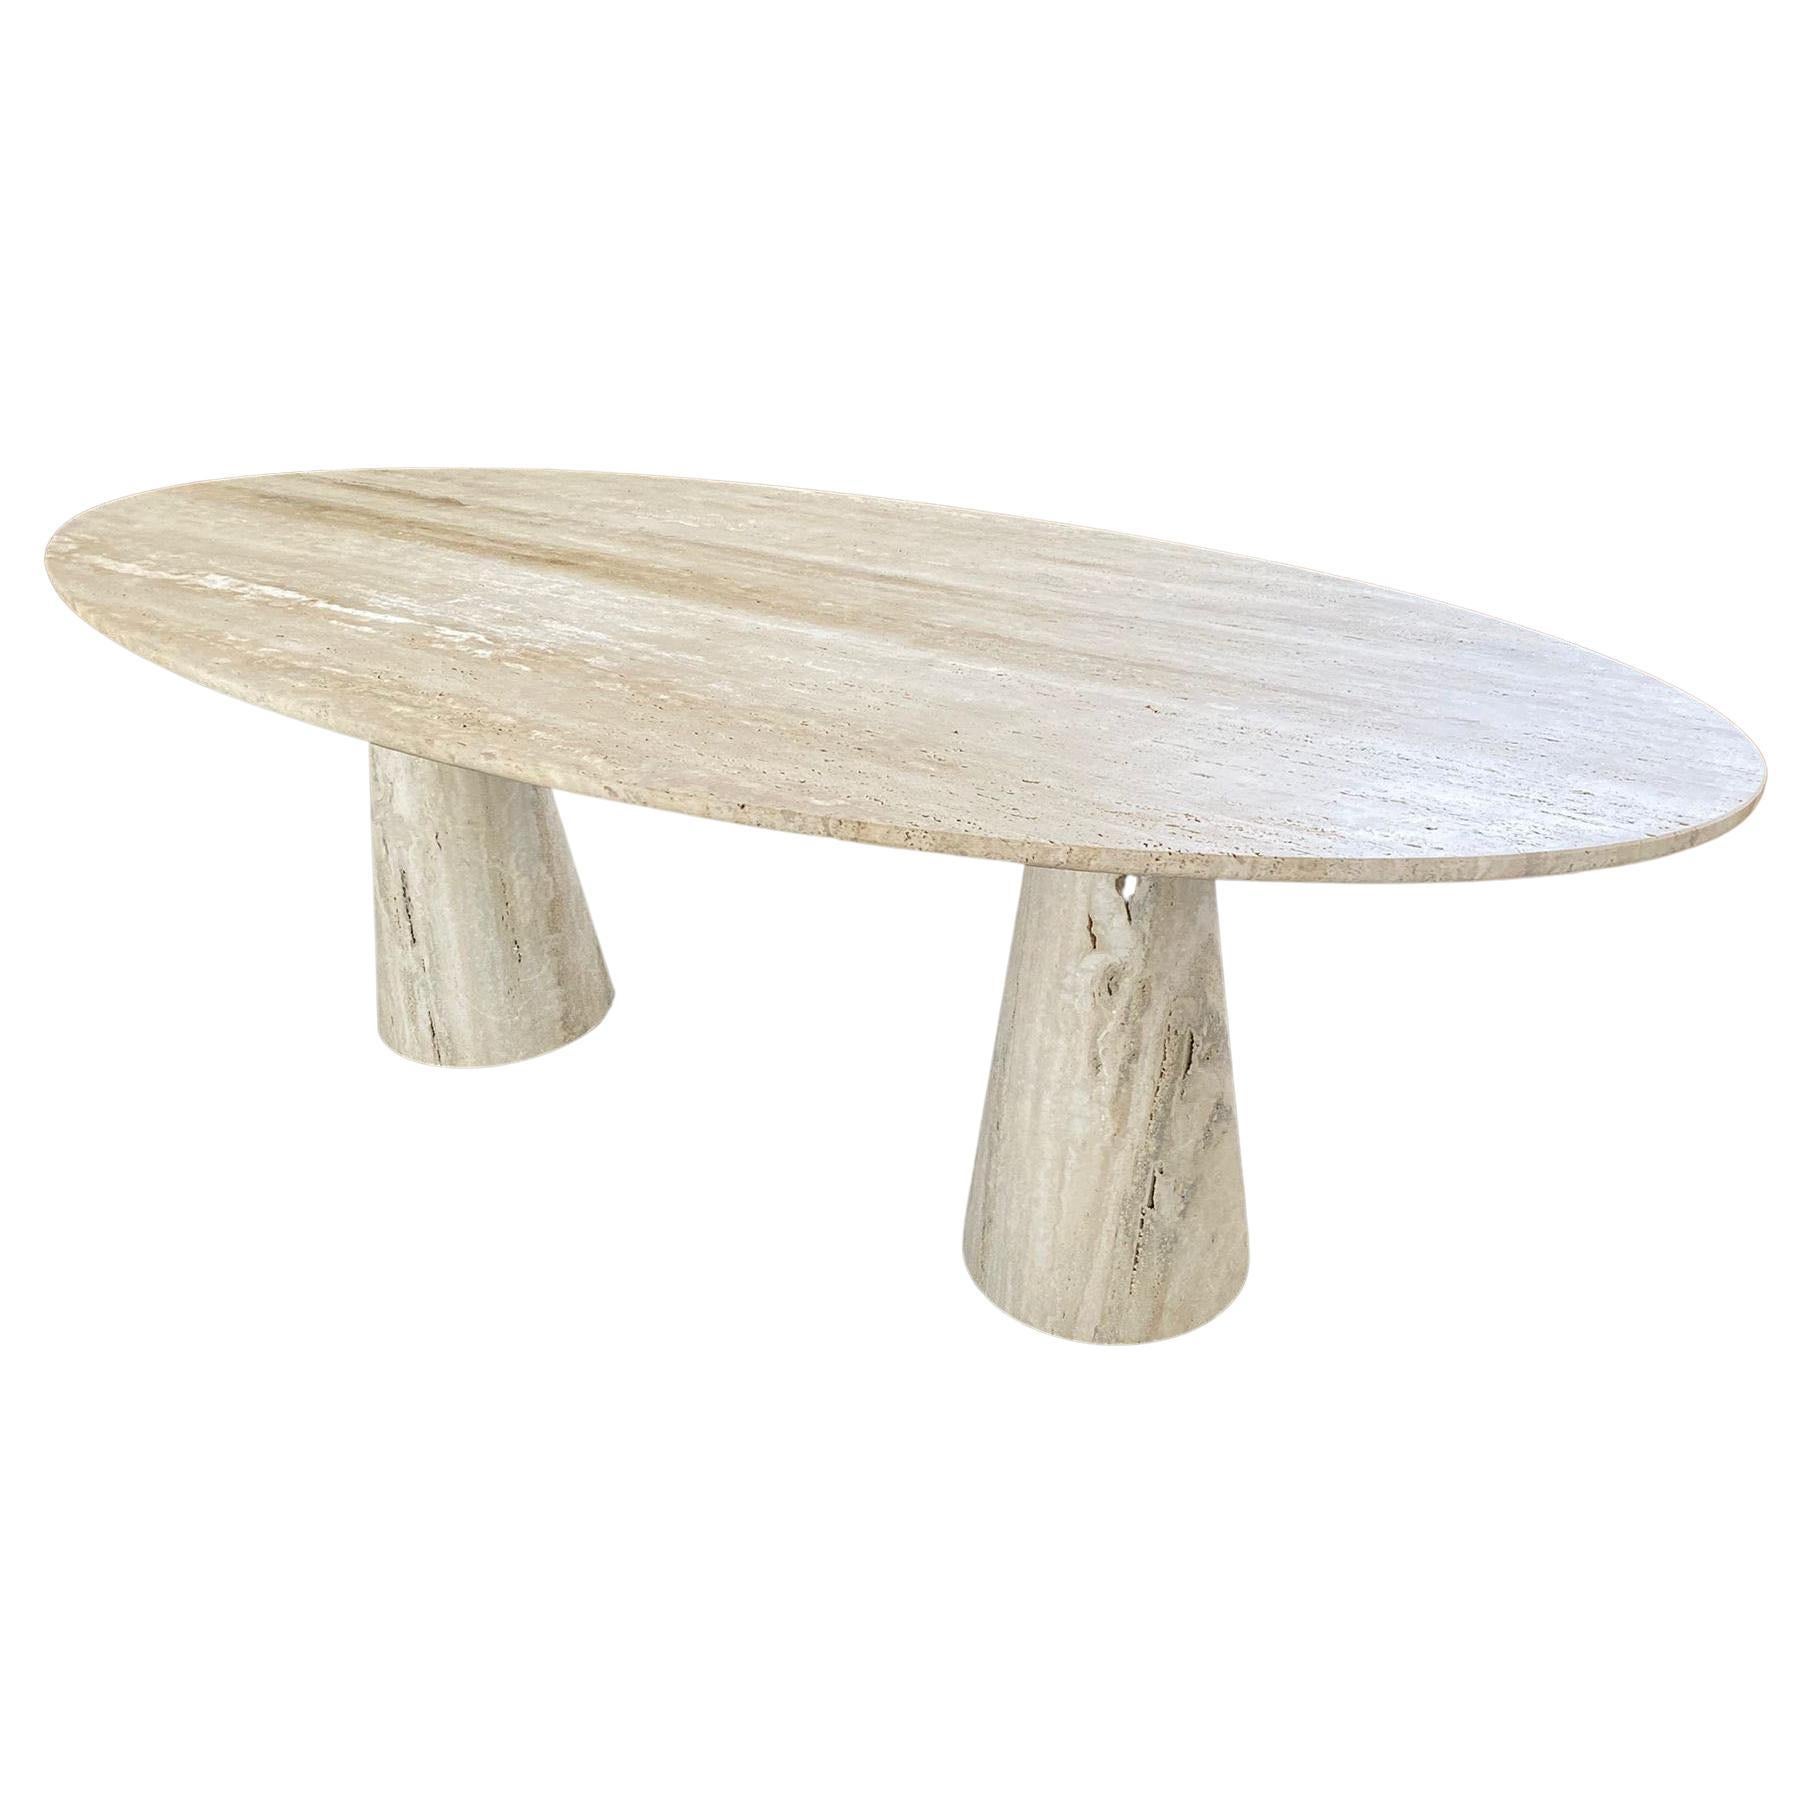 Bespoke Italian Travertine Oval Dining Table For Sale